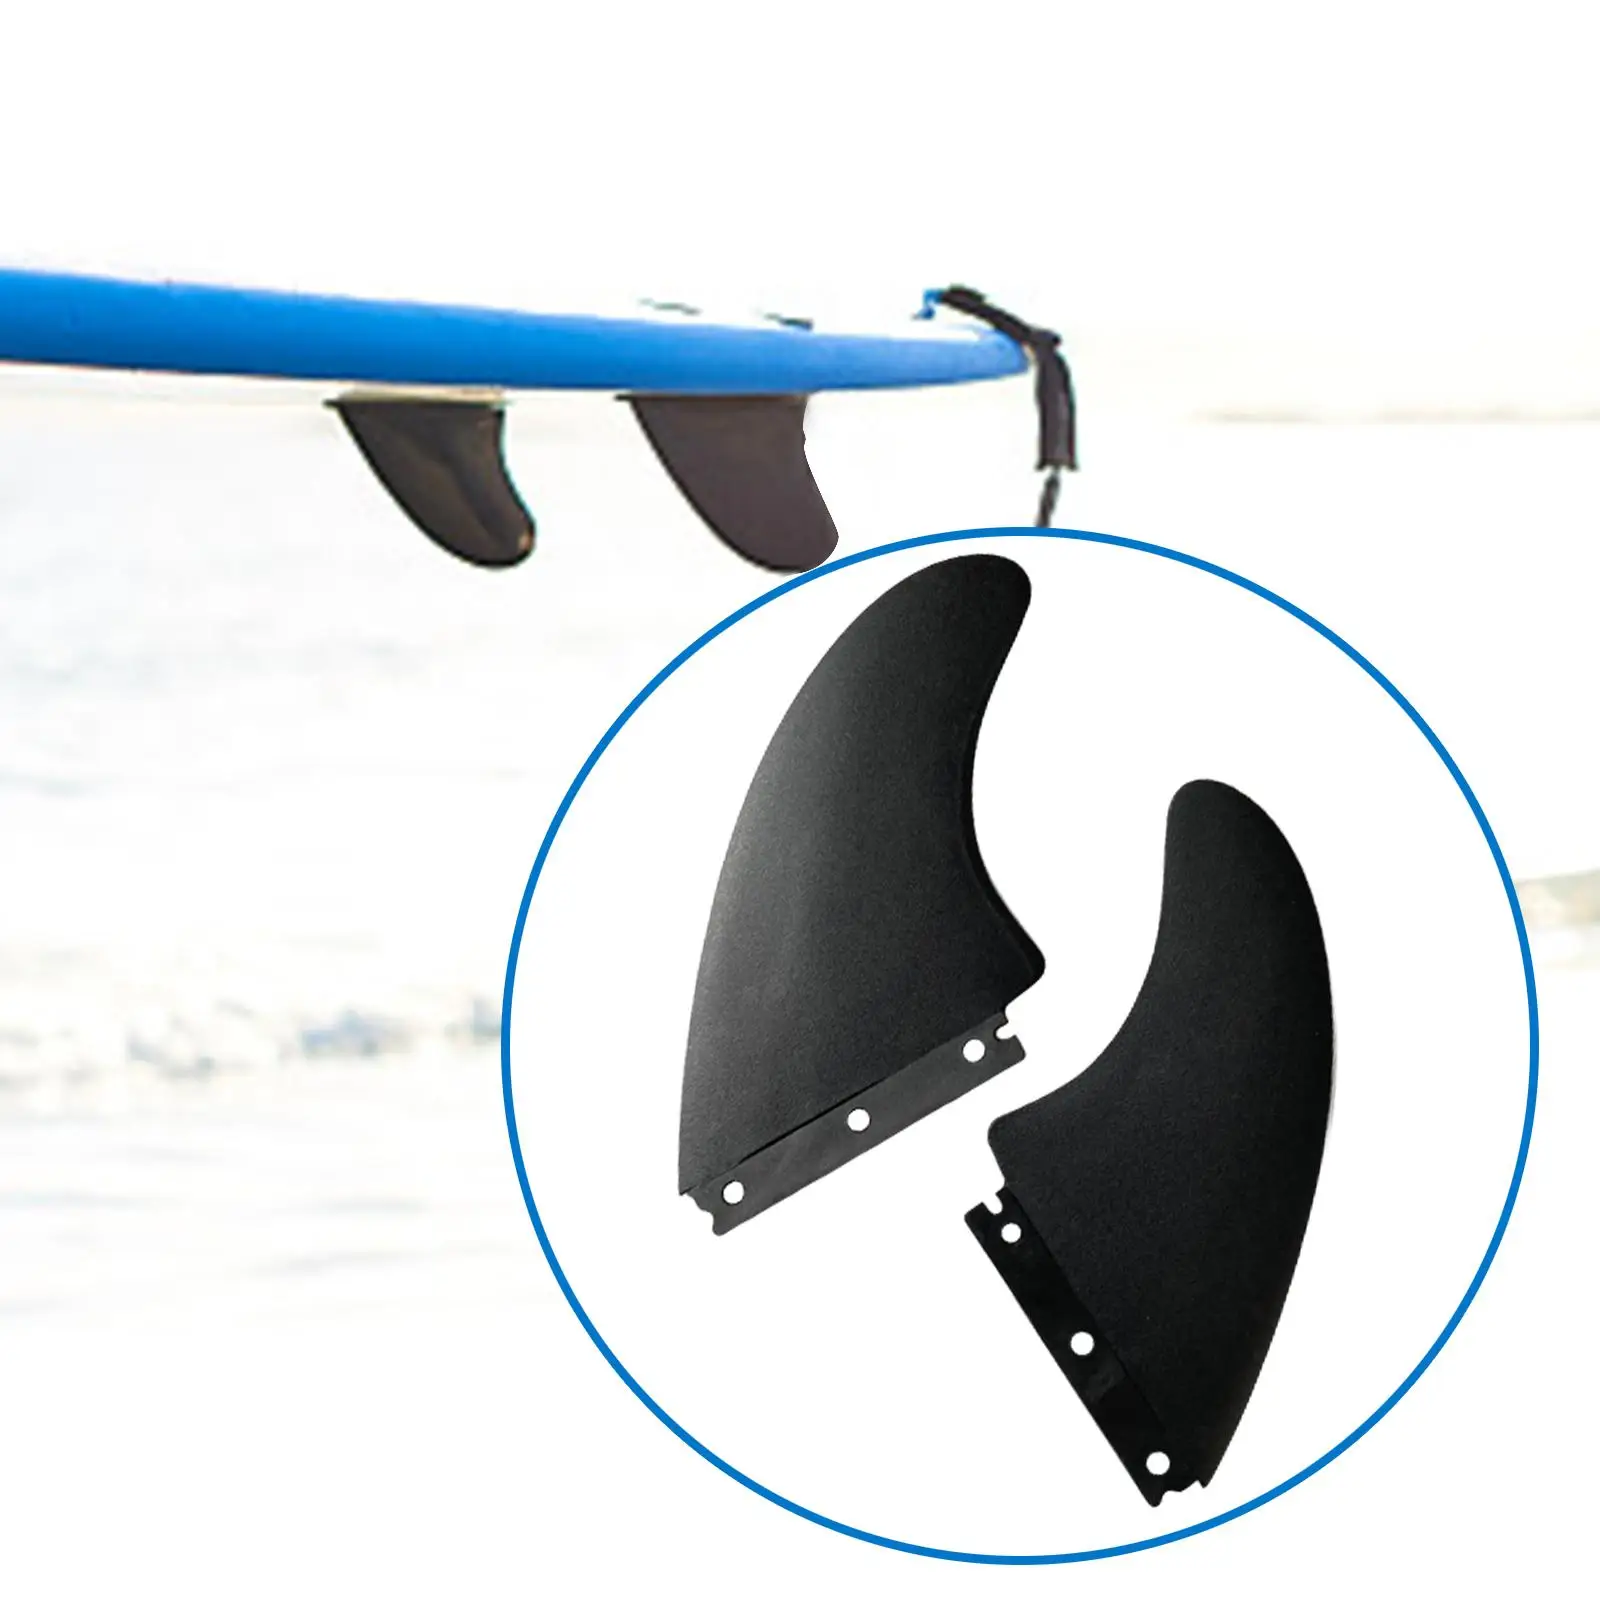 2Pcs Surfboard Fins Surf Board Tail Rudder Replacement Detachable Surfing Durable for Paddleboard Water Sports Canoe Accessories